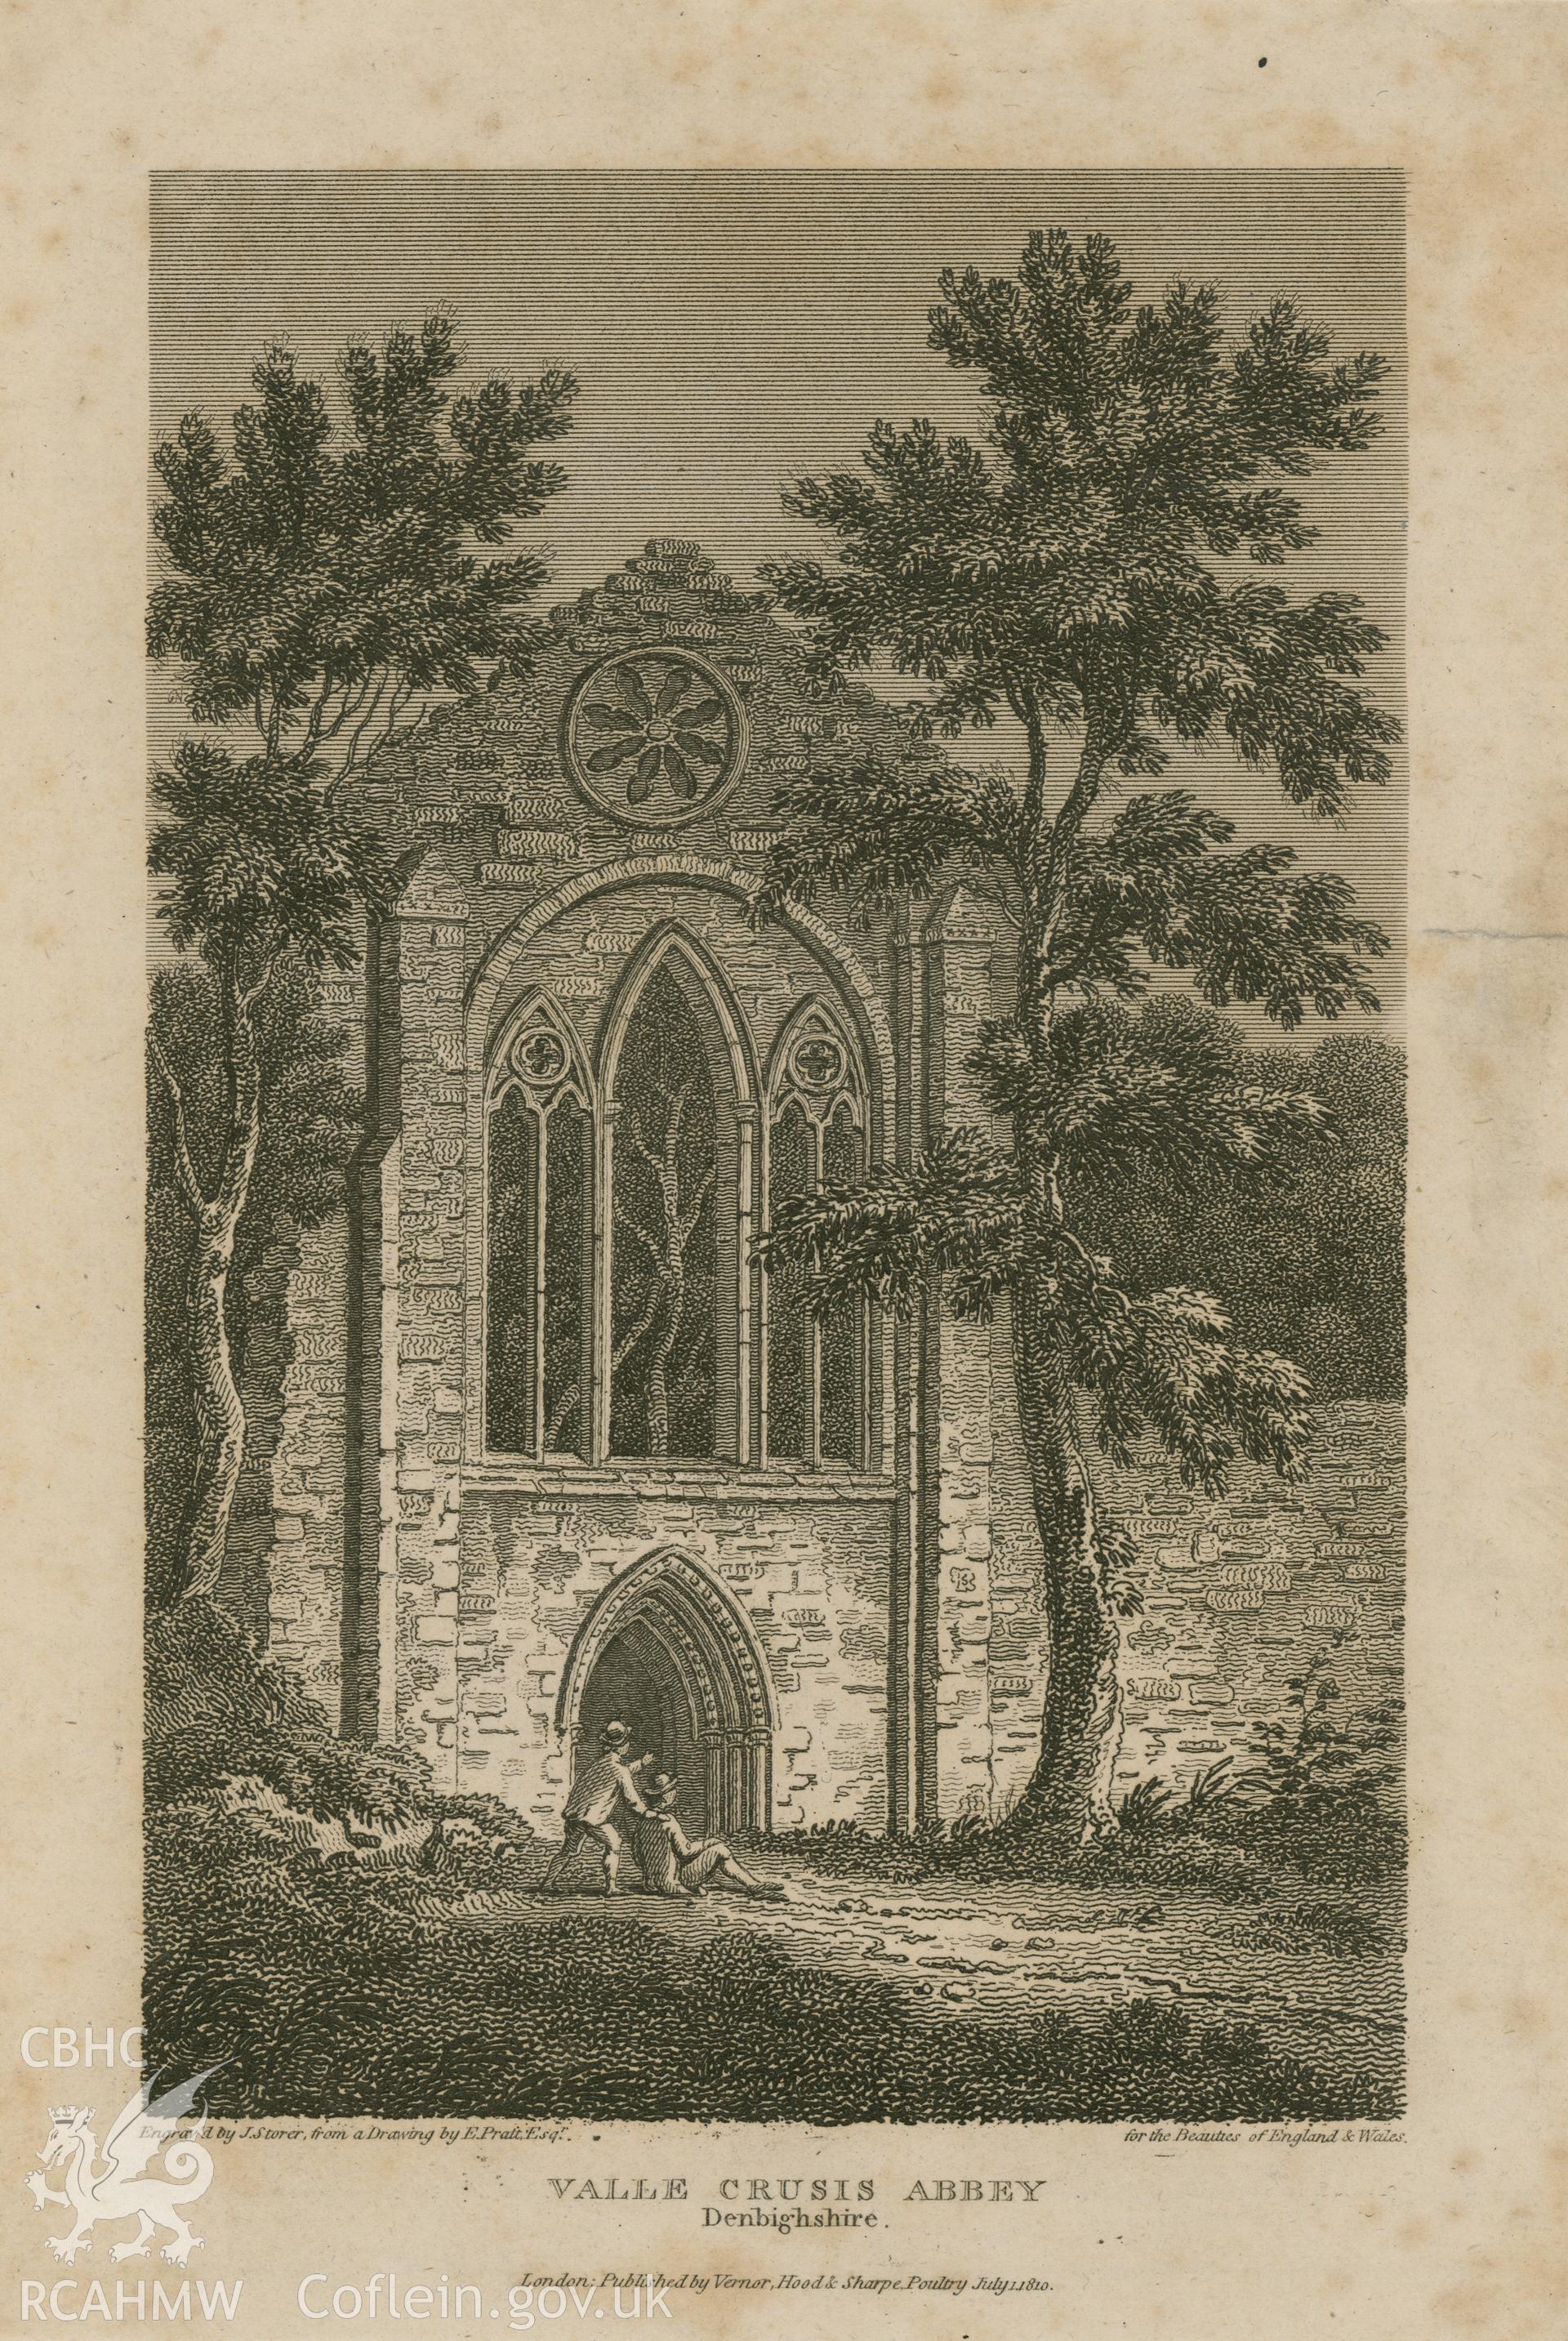 Valle Crucis Abbey; 1810 engraving by James Storer.